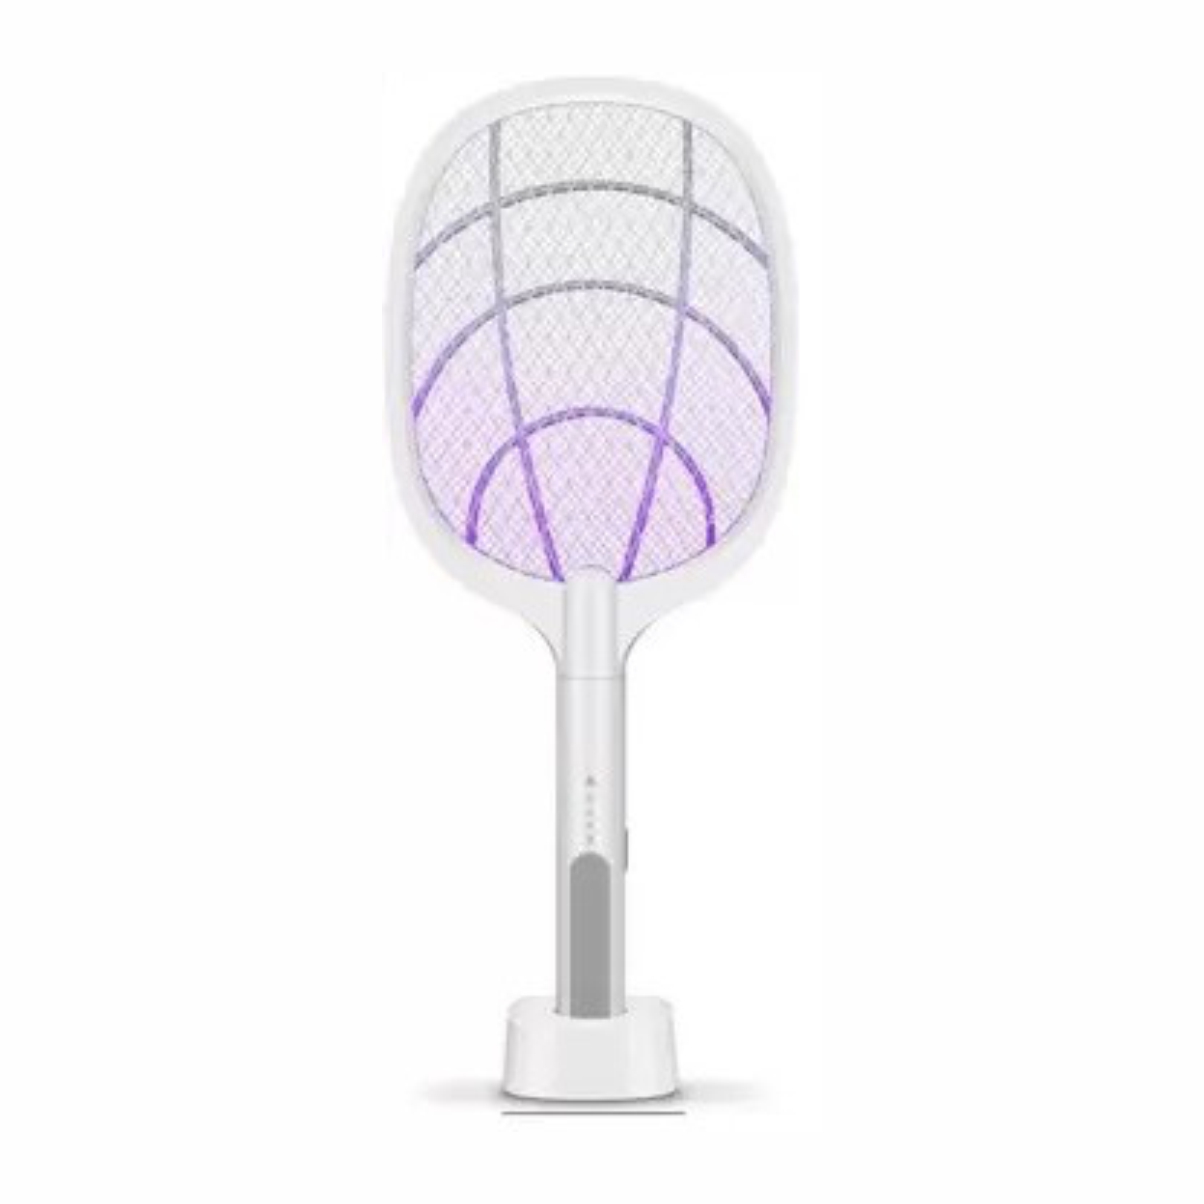 Rechargeable 2-in-1 Mosquito Racket with Stand - Electric Insect Killer Bat with UV Light